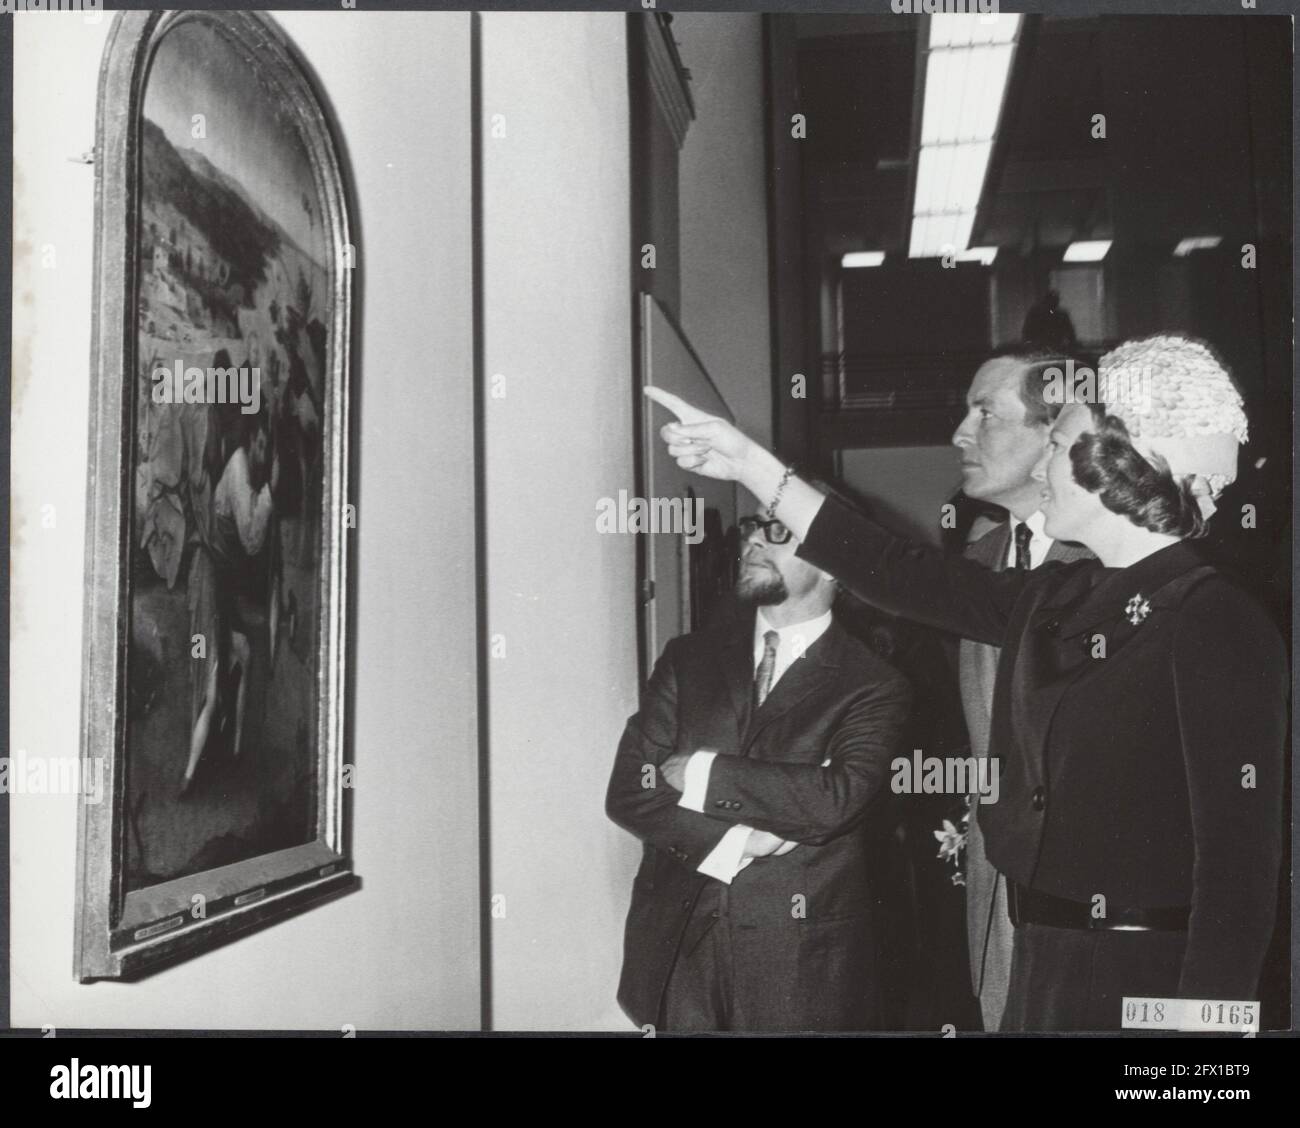 royal house, princes, princesses, openings, exhibitions, paintings, Beatrix, princess, Claus, prince, Frencken T., Jeroen Bosch, September 16, 1967, royal house, openings, princes, princesses, paintings, exhibitions, The Netherlands, 20th century press agency photo, news to remember, documentary, historic photography 1945-1990, visual stories, human history of the Twentieth Century, capturing moments in time Stock Photo